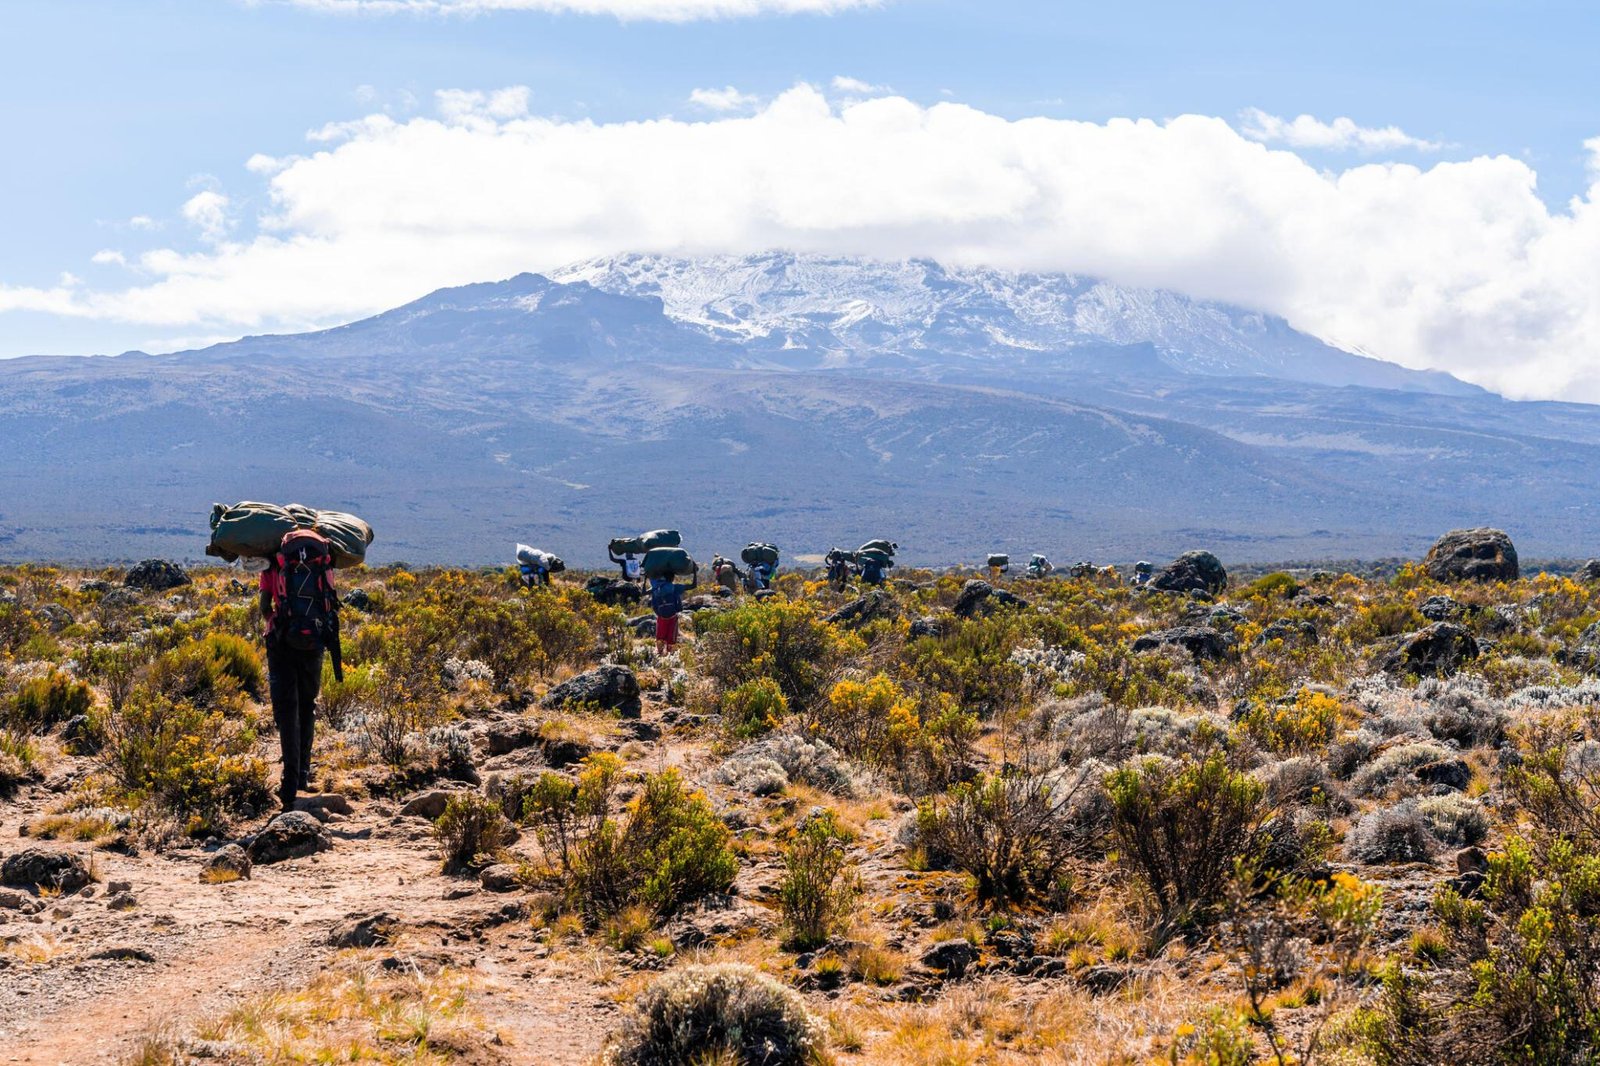 Interesting facts about Mt. Kilimanjaro